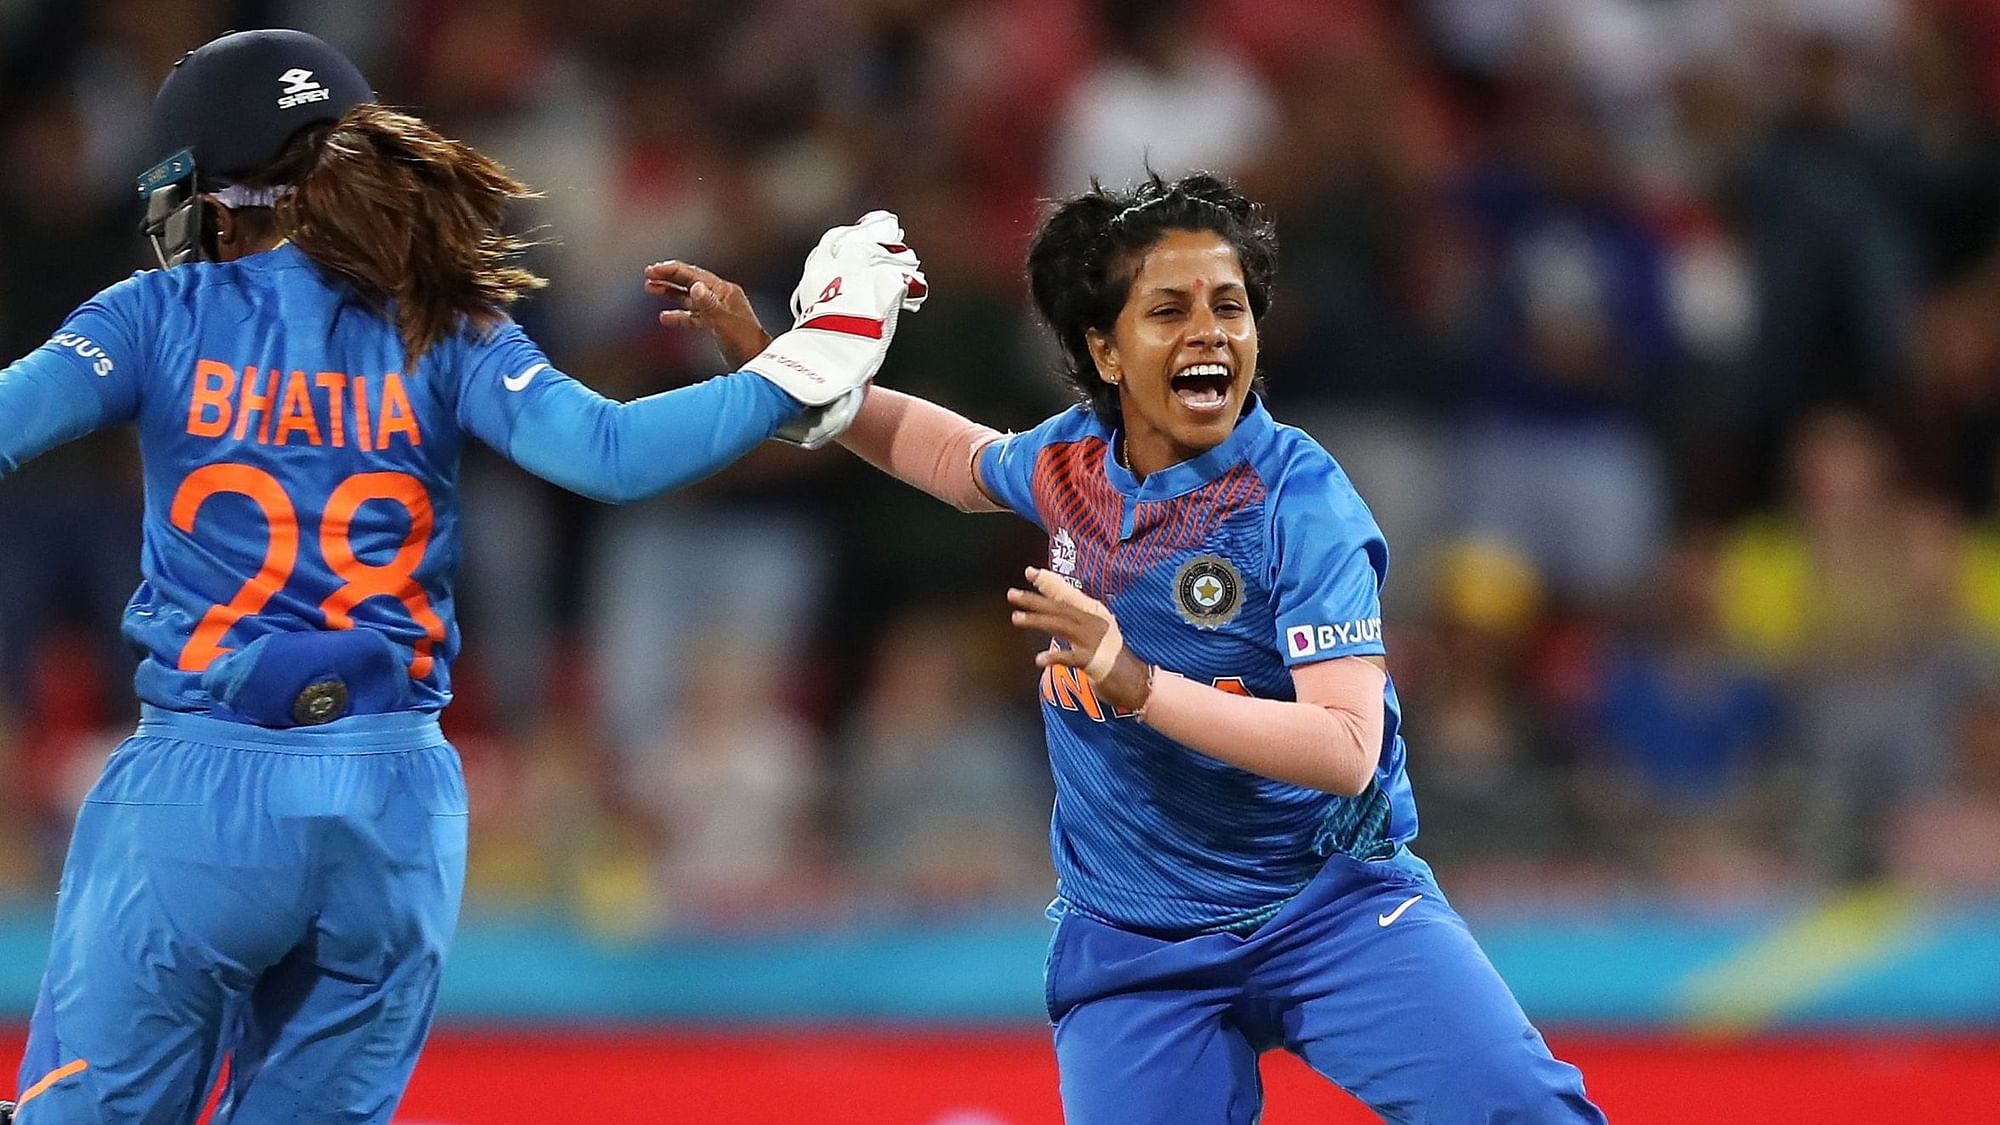 Poonam Yadav celebrates a wicket during India’s T20 World Cup win over Australia.